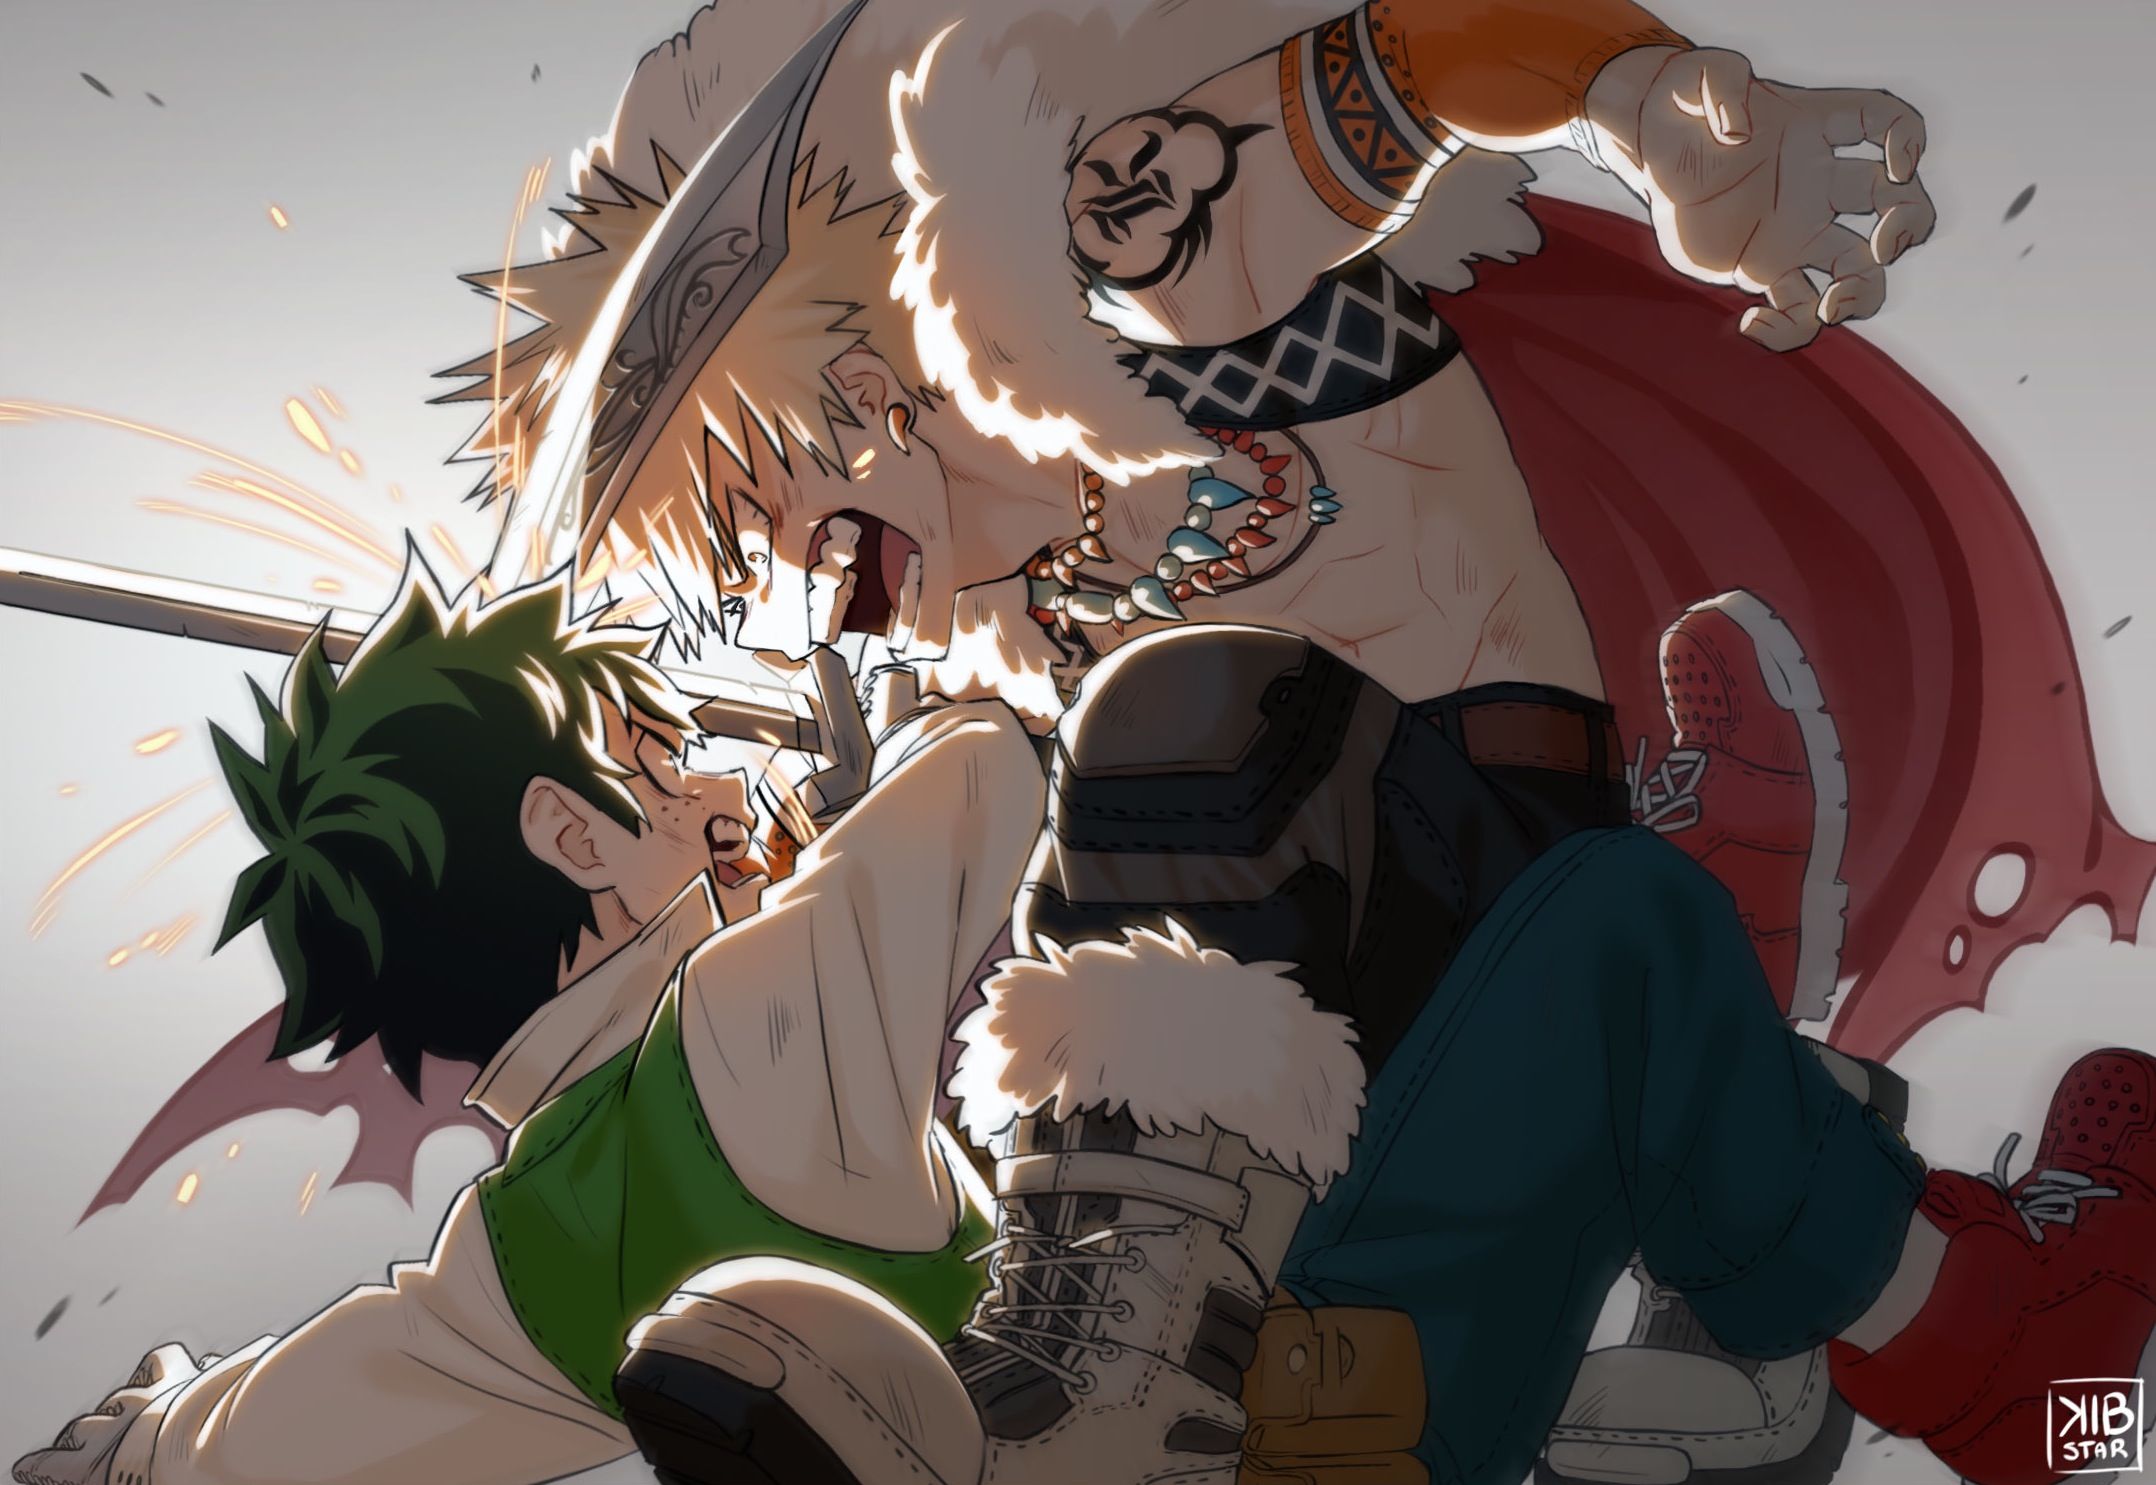 Tons of awesome Bakugo x Deku My Hero Academia wallpapers to download for f...